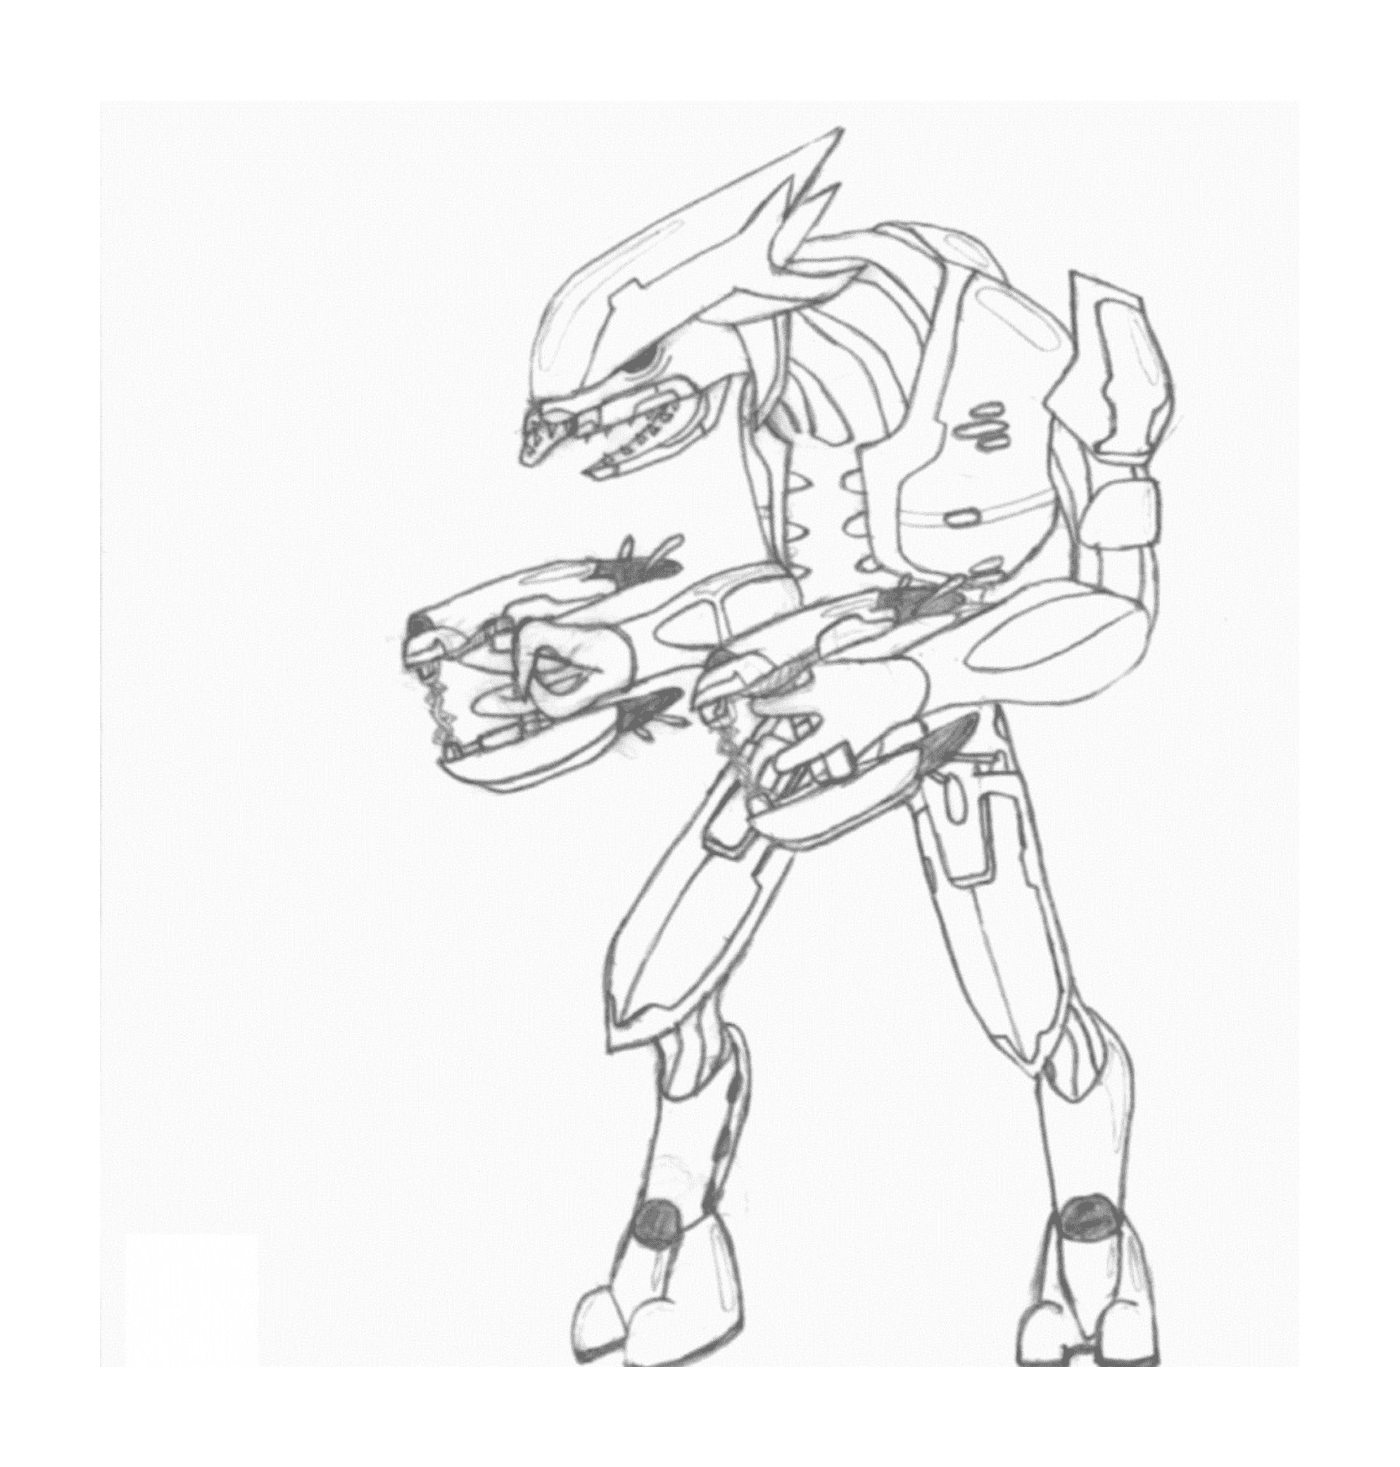  Robot armed with a rifle 